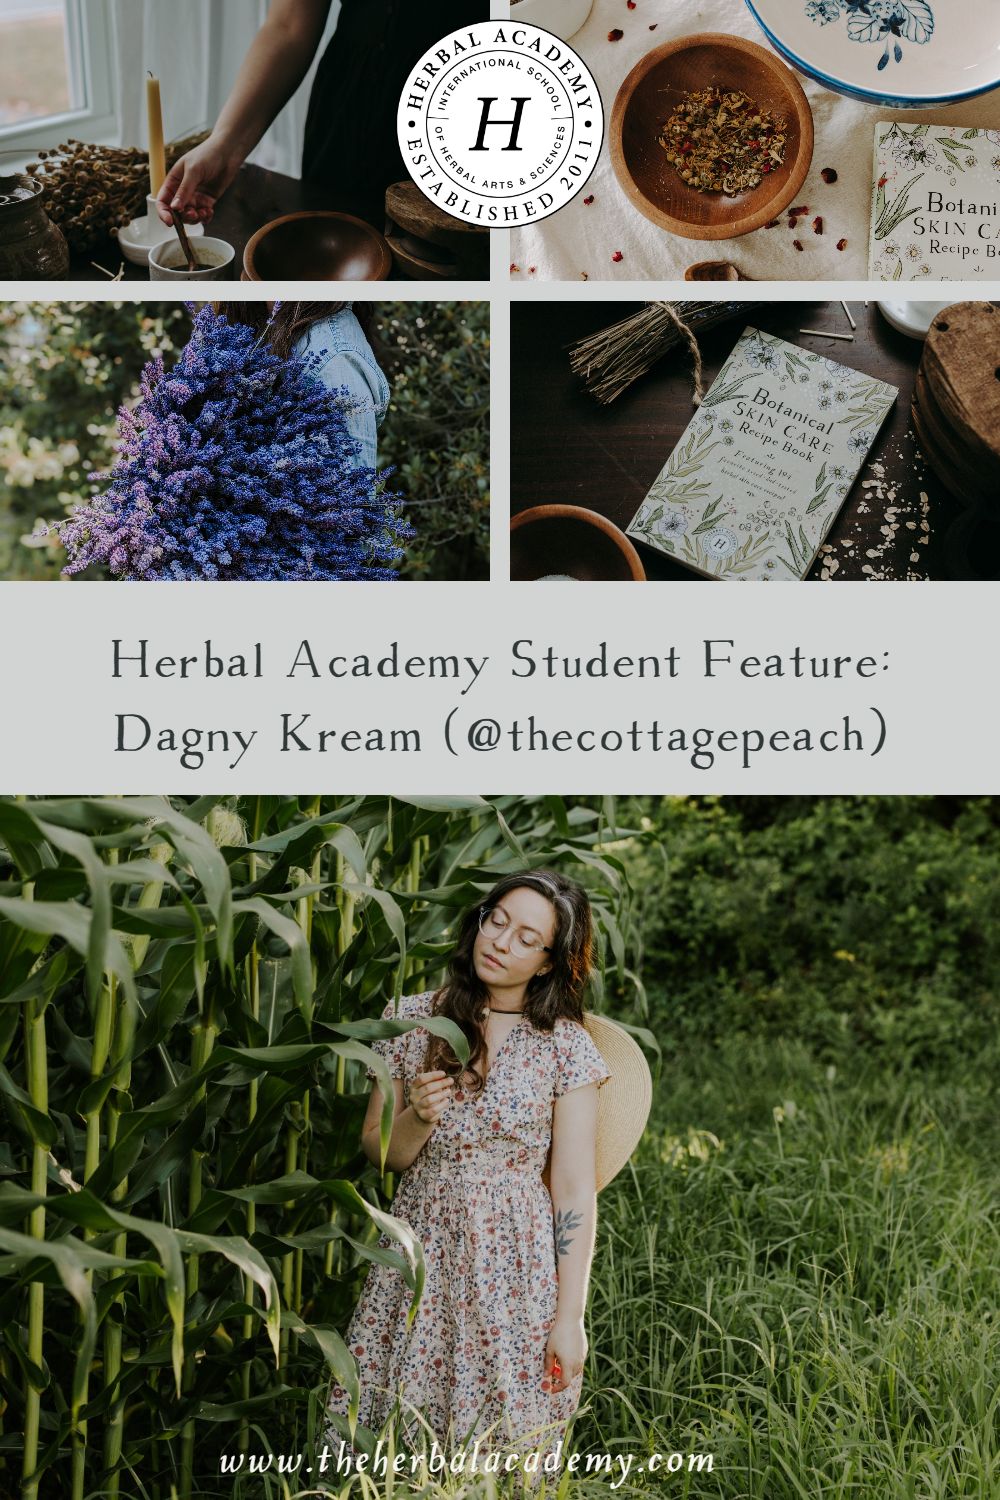 Herbal Academy Student Feature: Dagny Kream (@thecottagepeach) | Herbal Academy | Dagny Kream, the owner of The Cottage Peach, shares slow-living inspiration: recipes, gardening, crafting, traditional skills, and more.